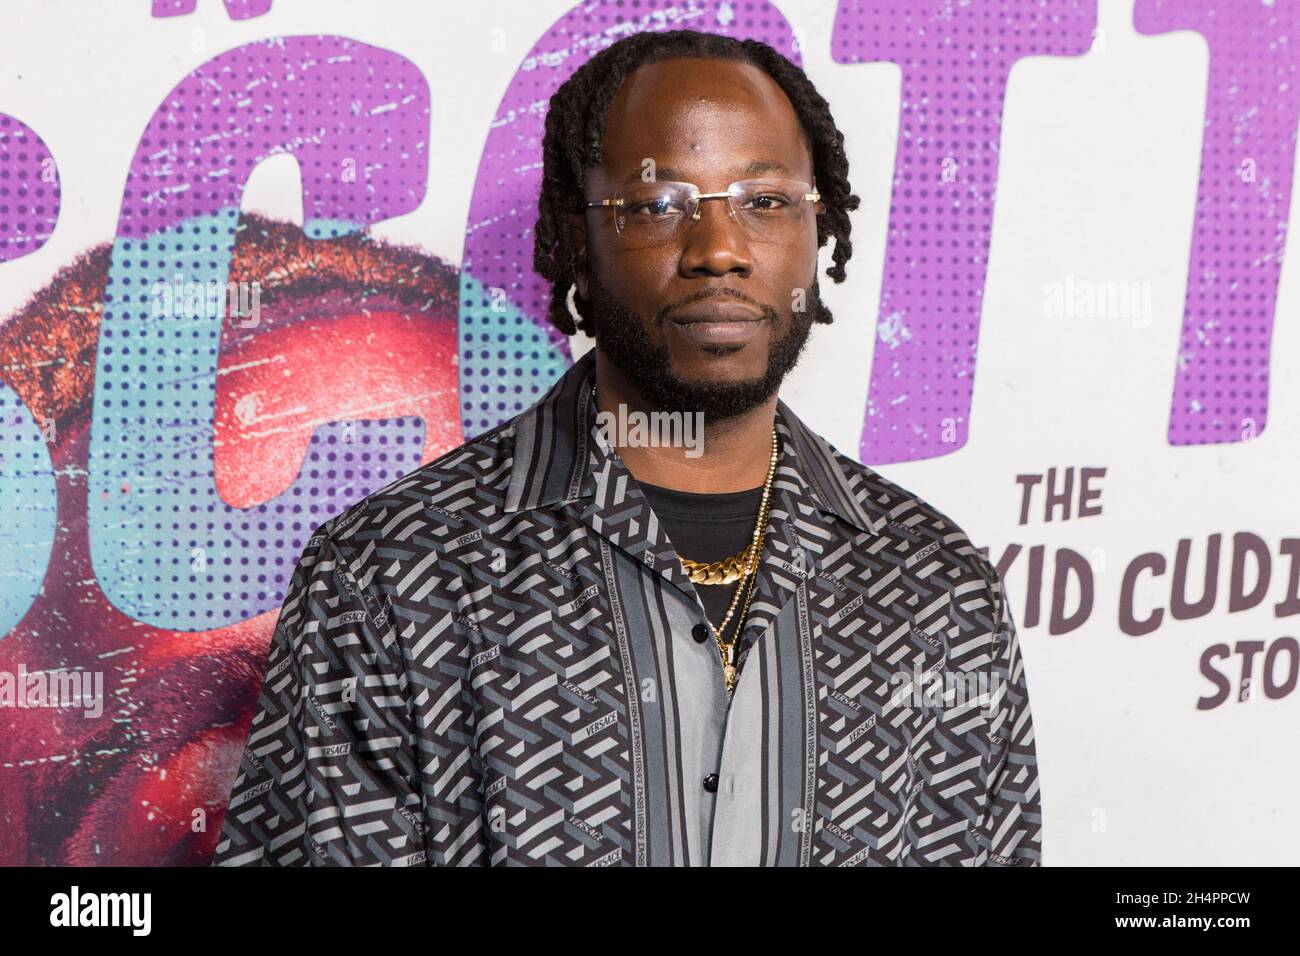 Los Angeles, United States. 03rd Nov, 2021. LOS ANGELES, CALIFORNIA, USA - NOVEMBER 03: Record producer Dot da Genius (Oladipo Omishore) arrives at the Los Angeles Special Screening Of Amazon Prime Video's 'A Man Named Scott' held at the Billy Wilder Theater at The Hammer Museum on November 3, 2021 in Los Angeles, California, United States. (Photo by Rudy Torres/Image Press Agency) Credit: Image Press Agency/Alamy Live News Stock Photo